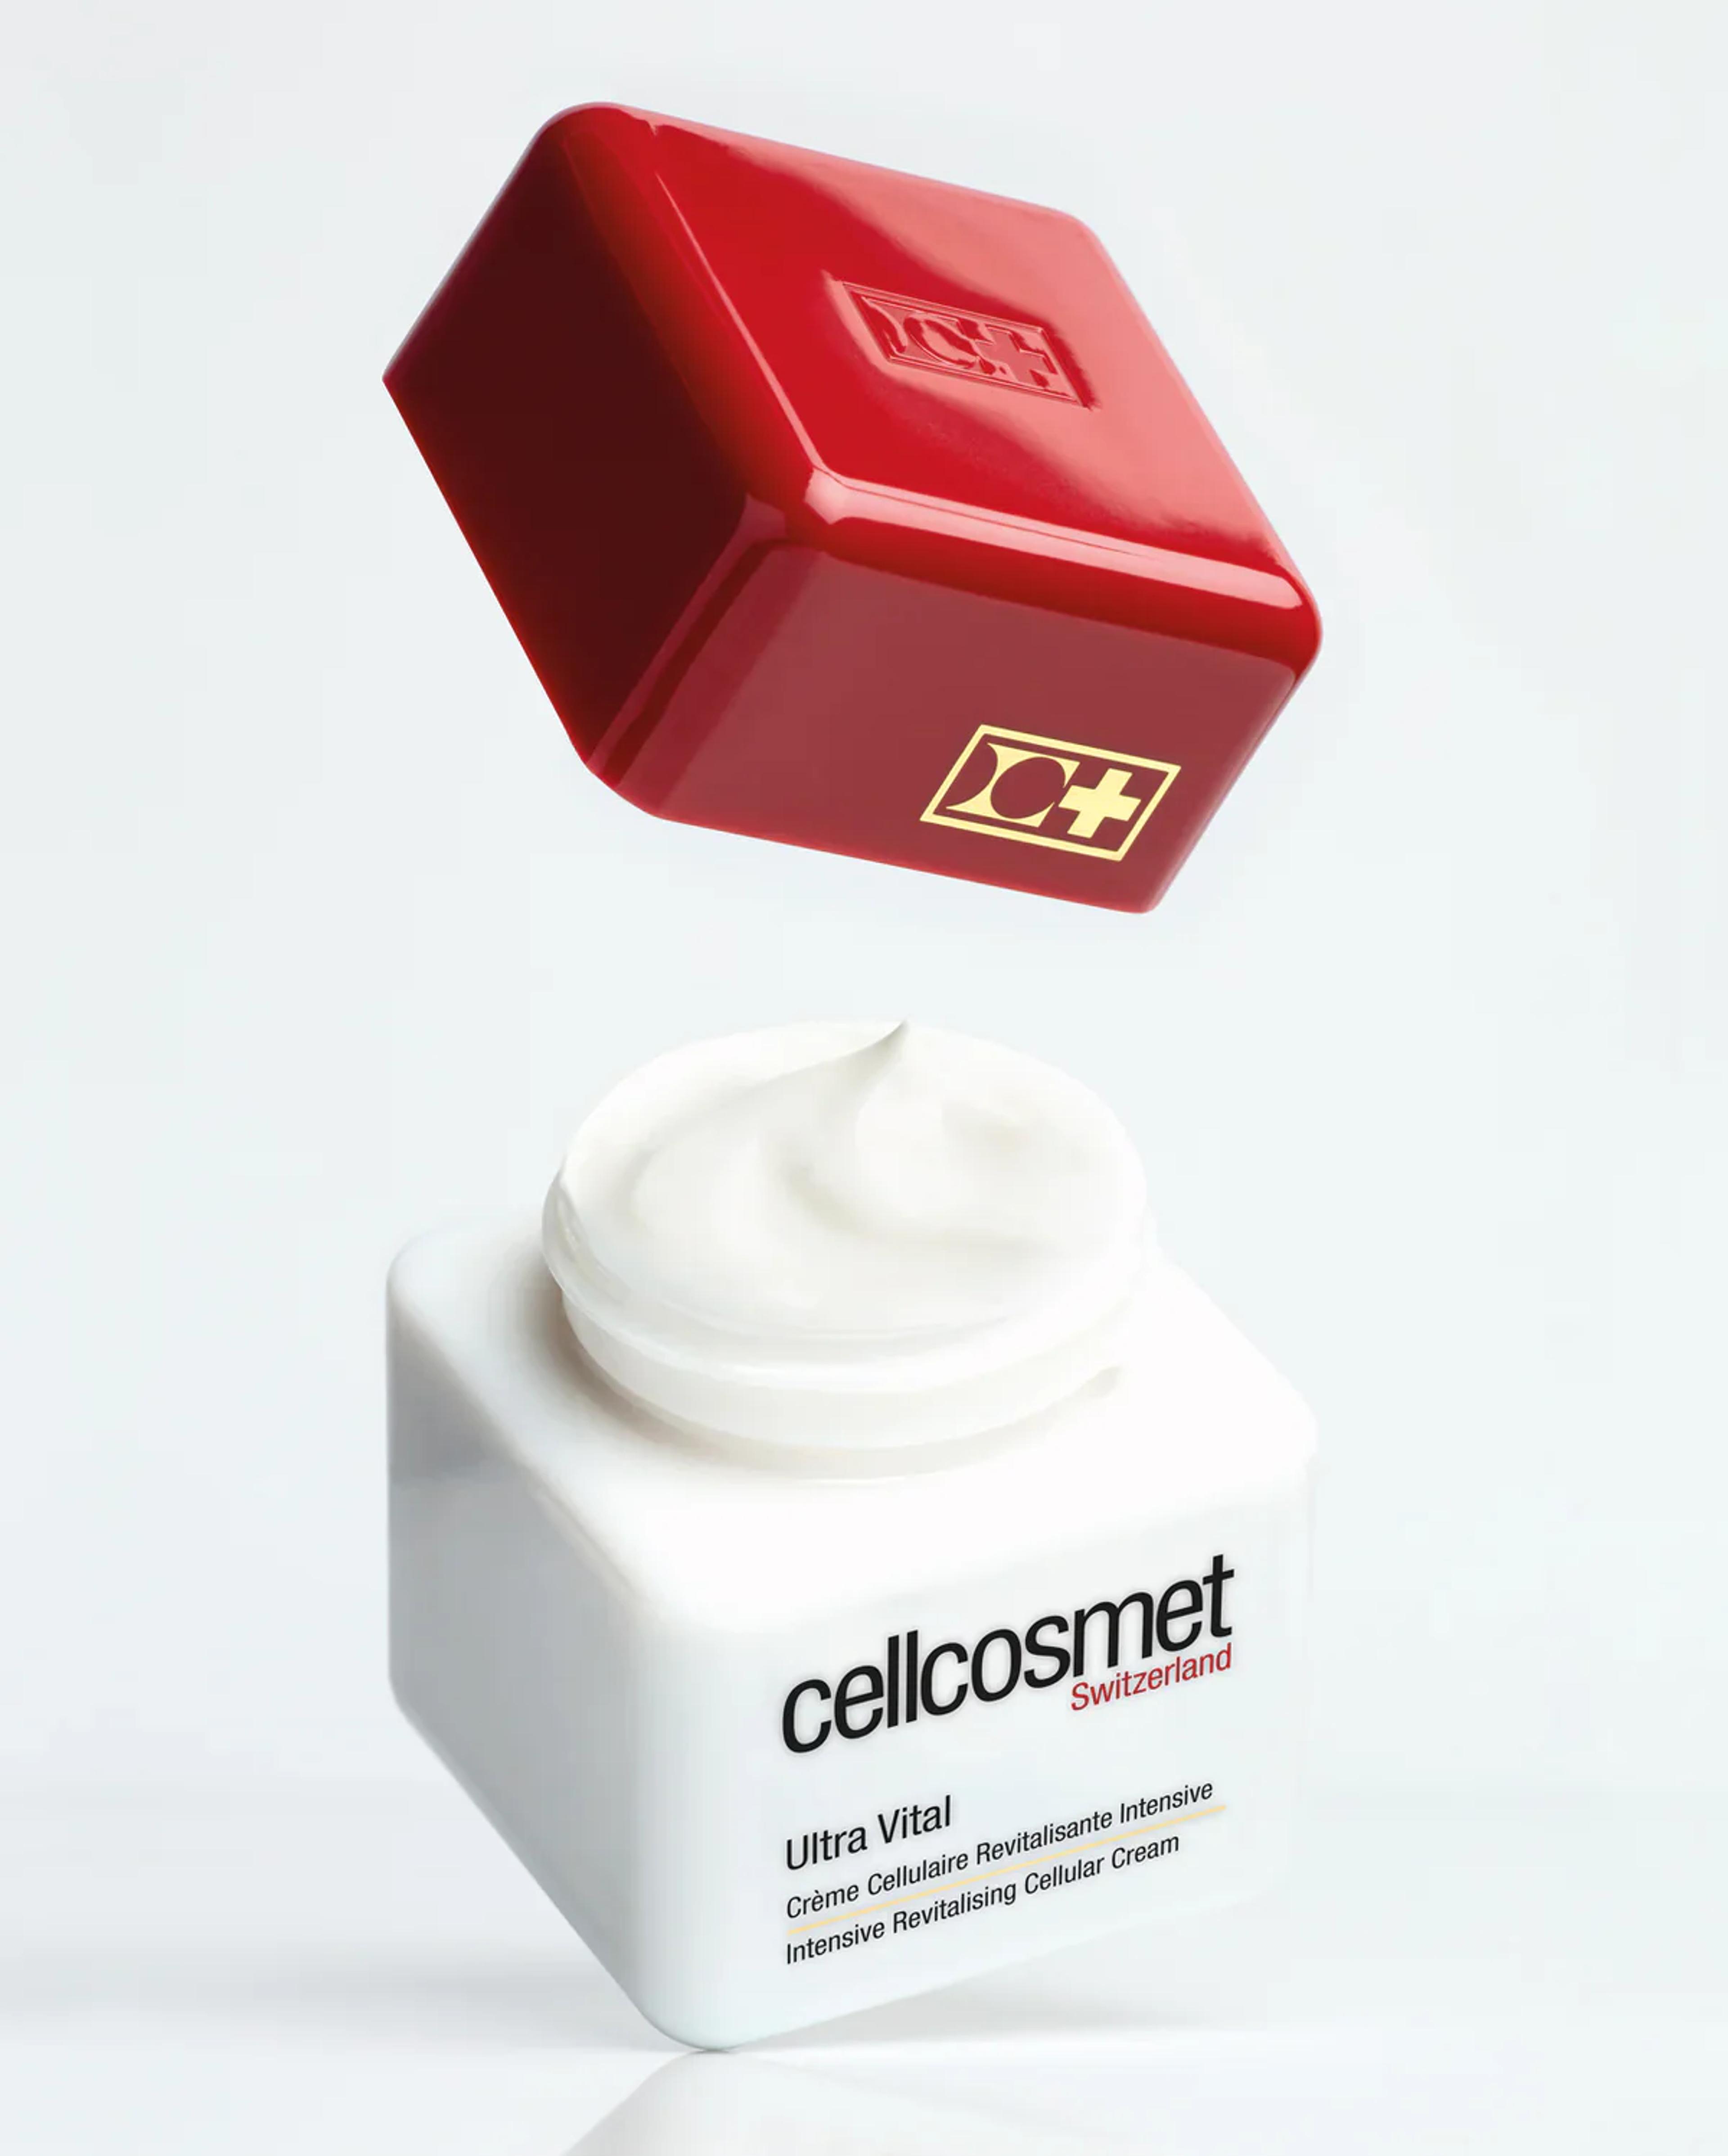 Cellcosmet Launches International Site On Shopify